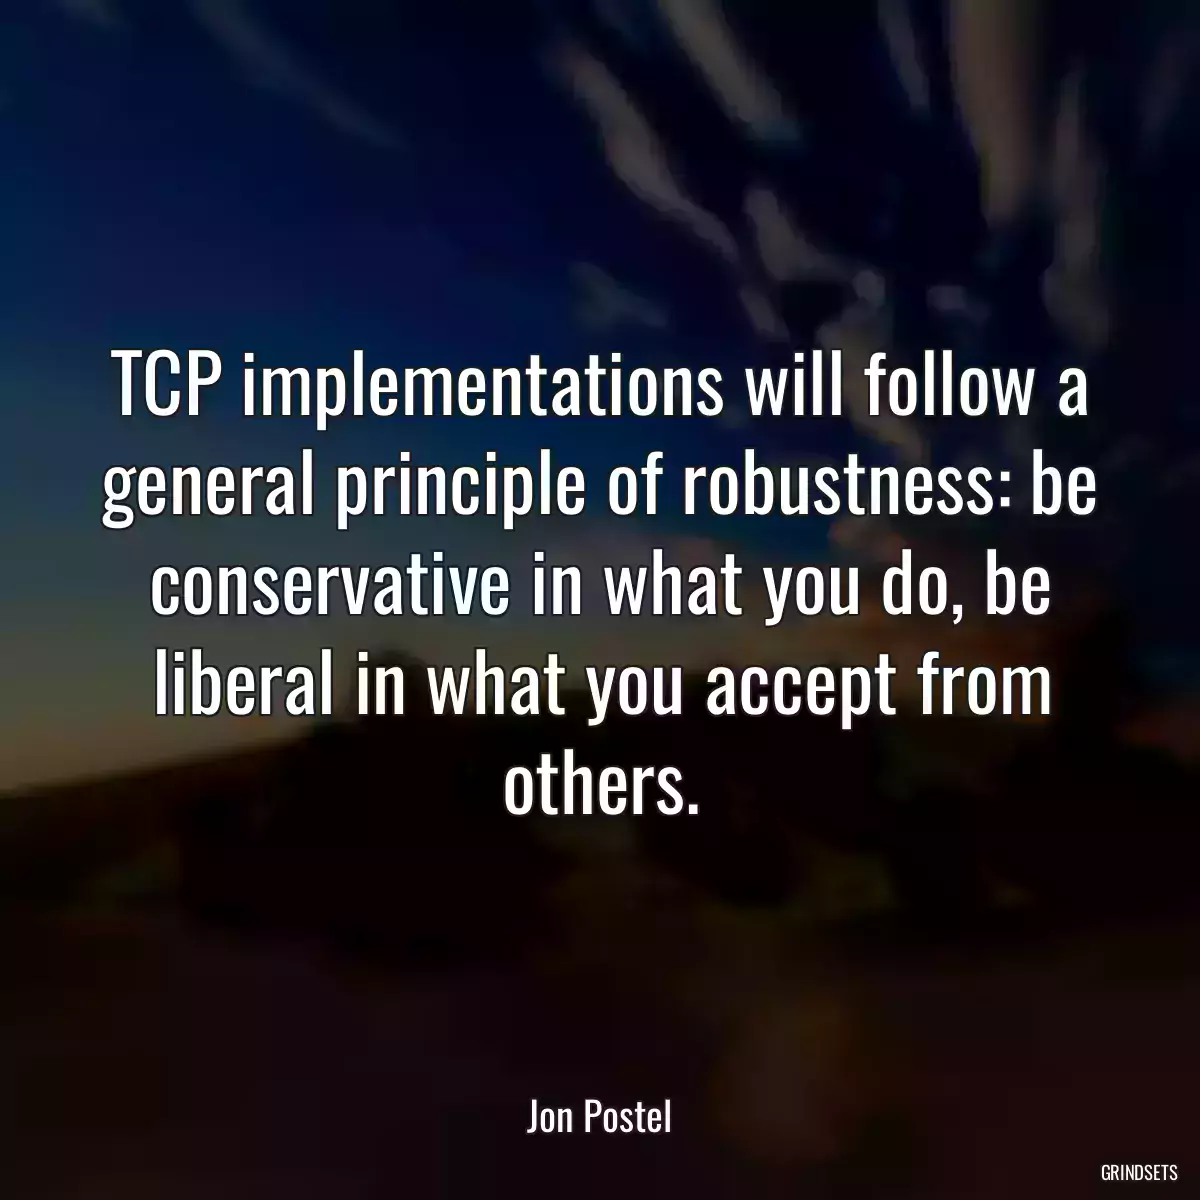 TCP implementations will follow a general principle of robustness: be conservative in what you do, be liberal in what you accept from others.